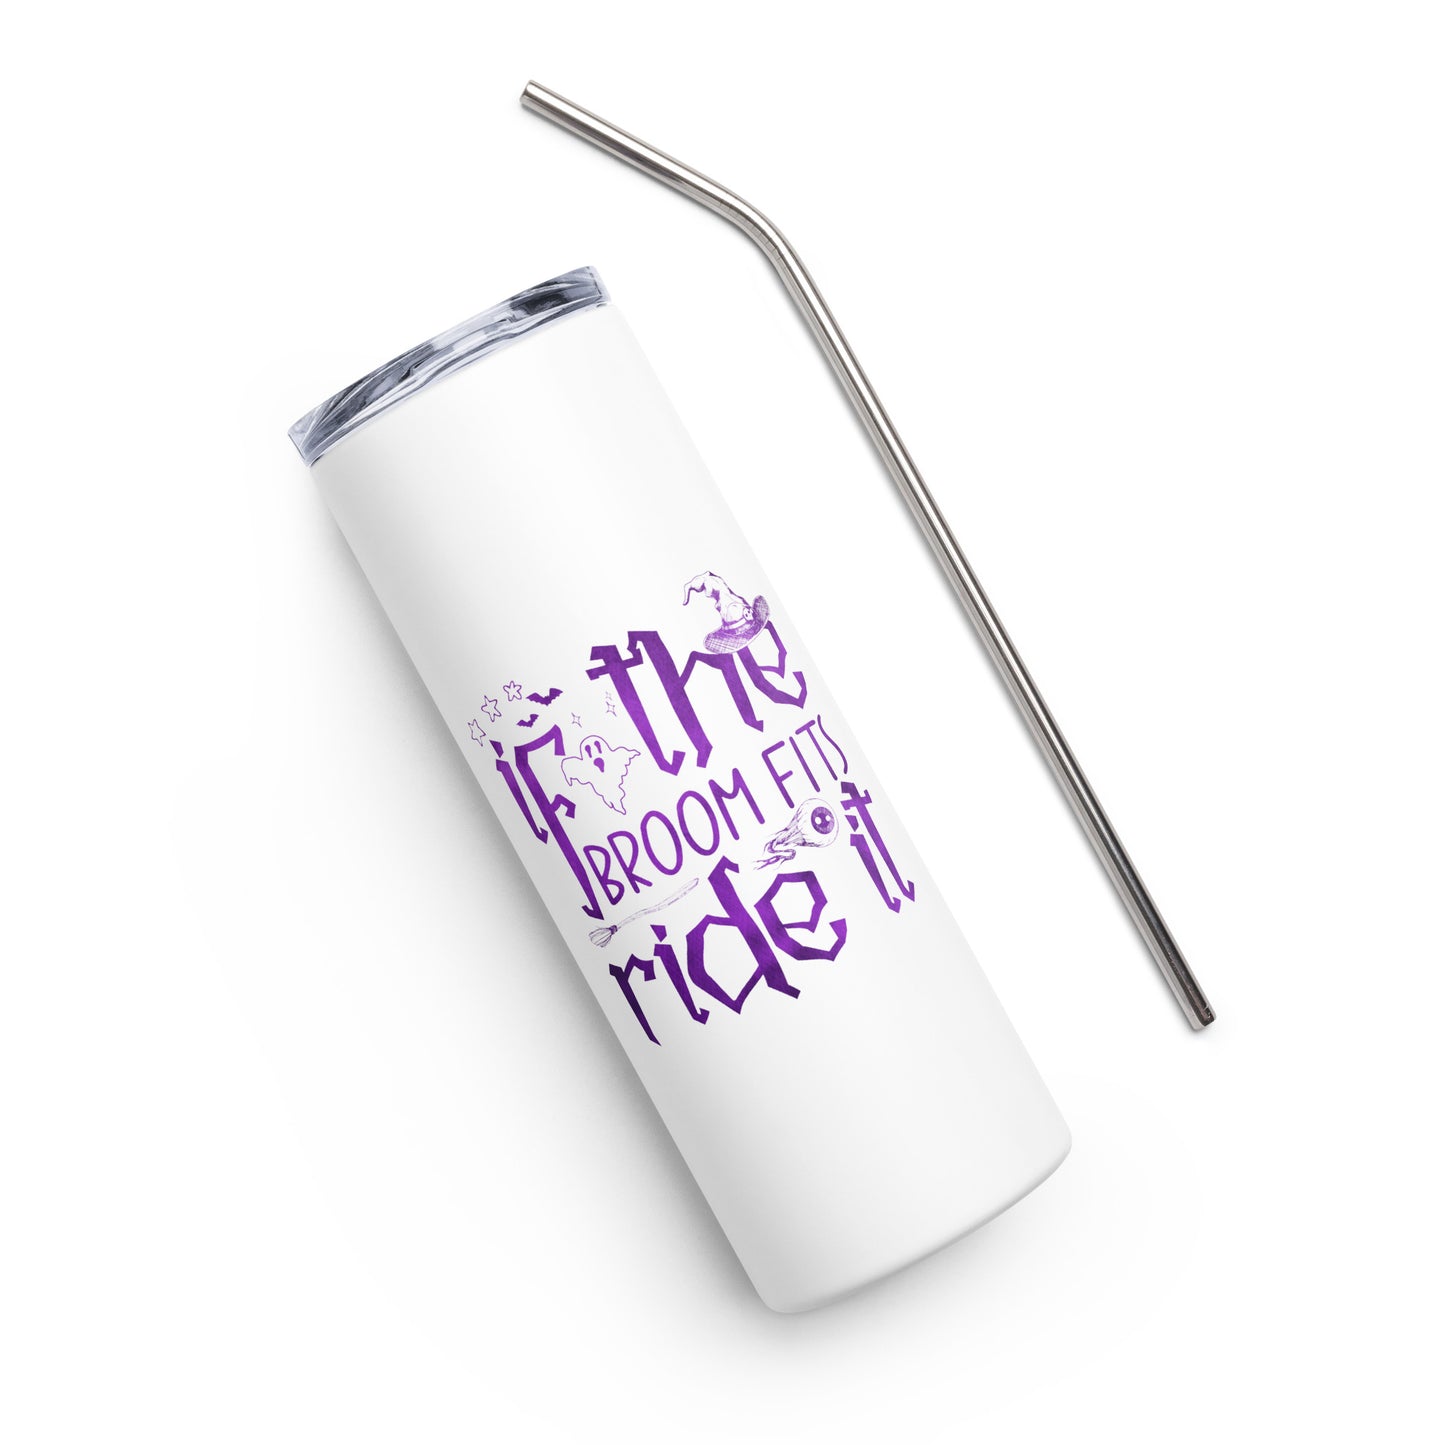 If the Broom Fits Ride It Stainless steel tumbler